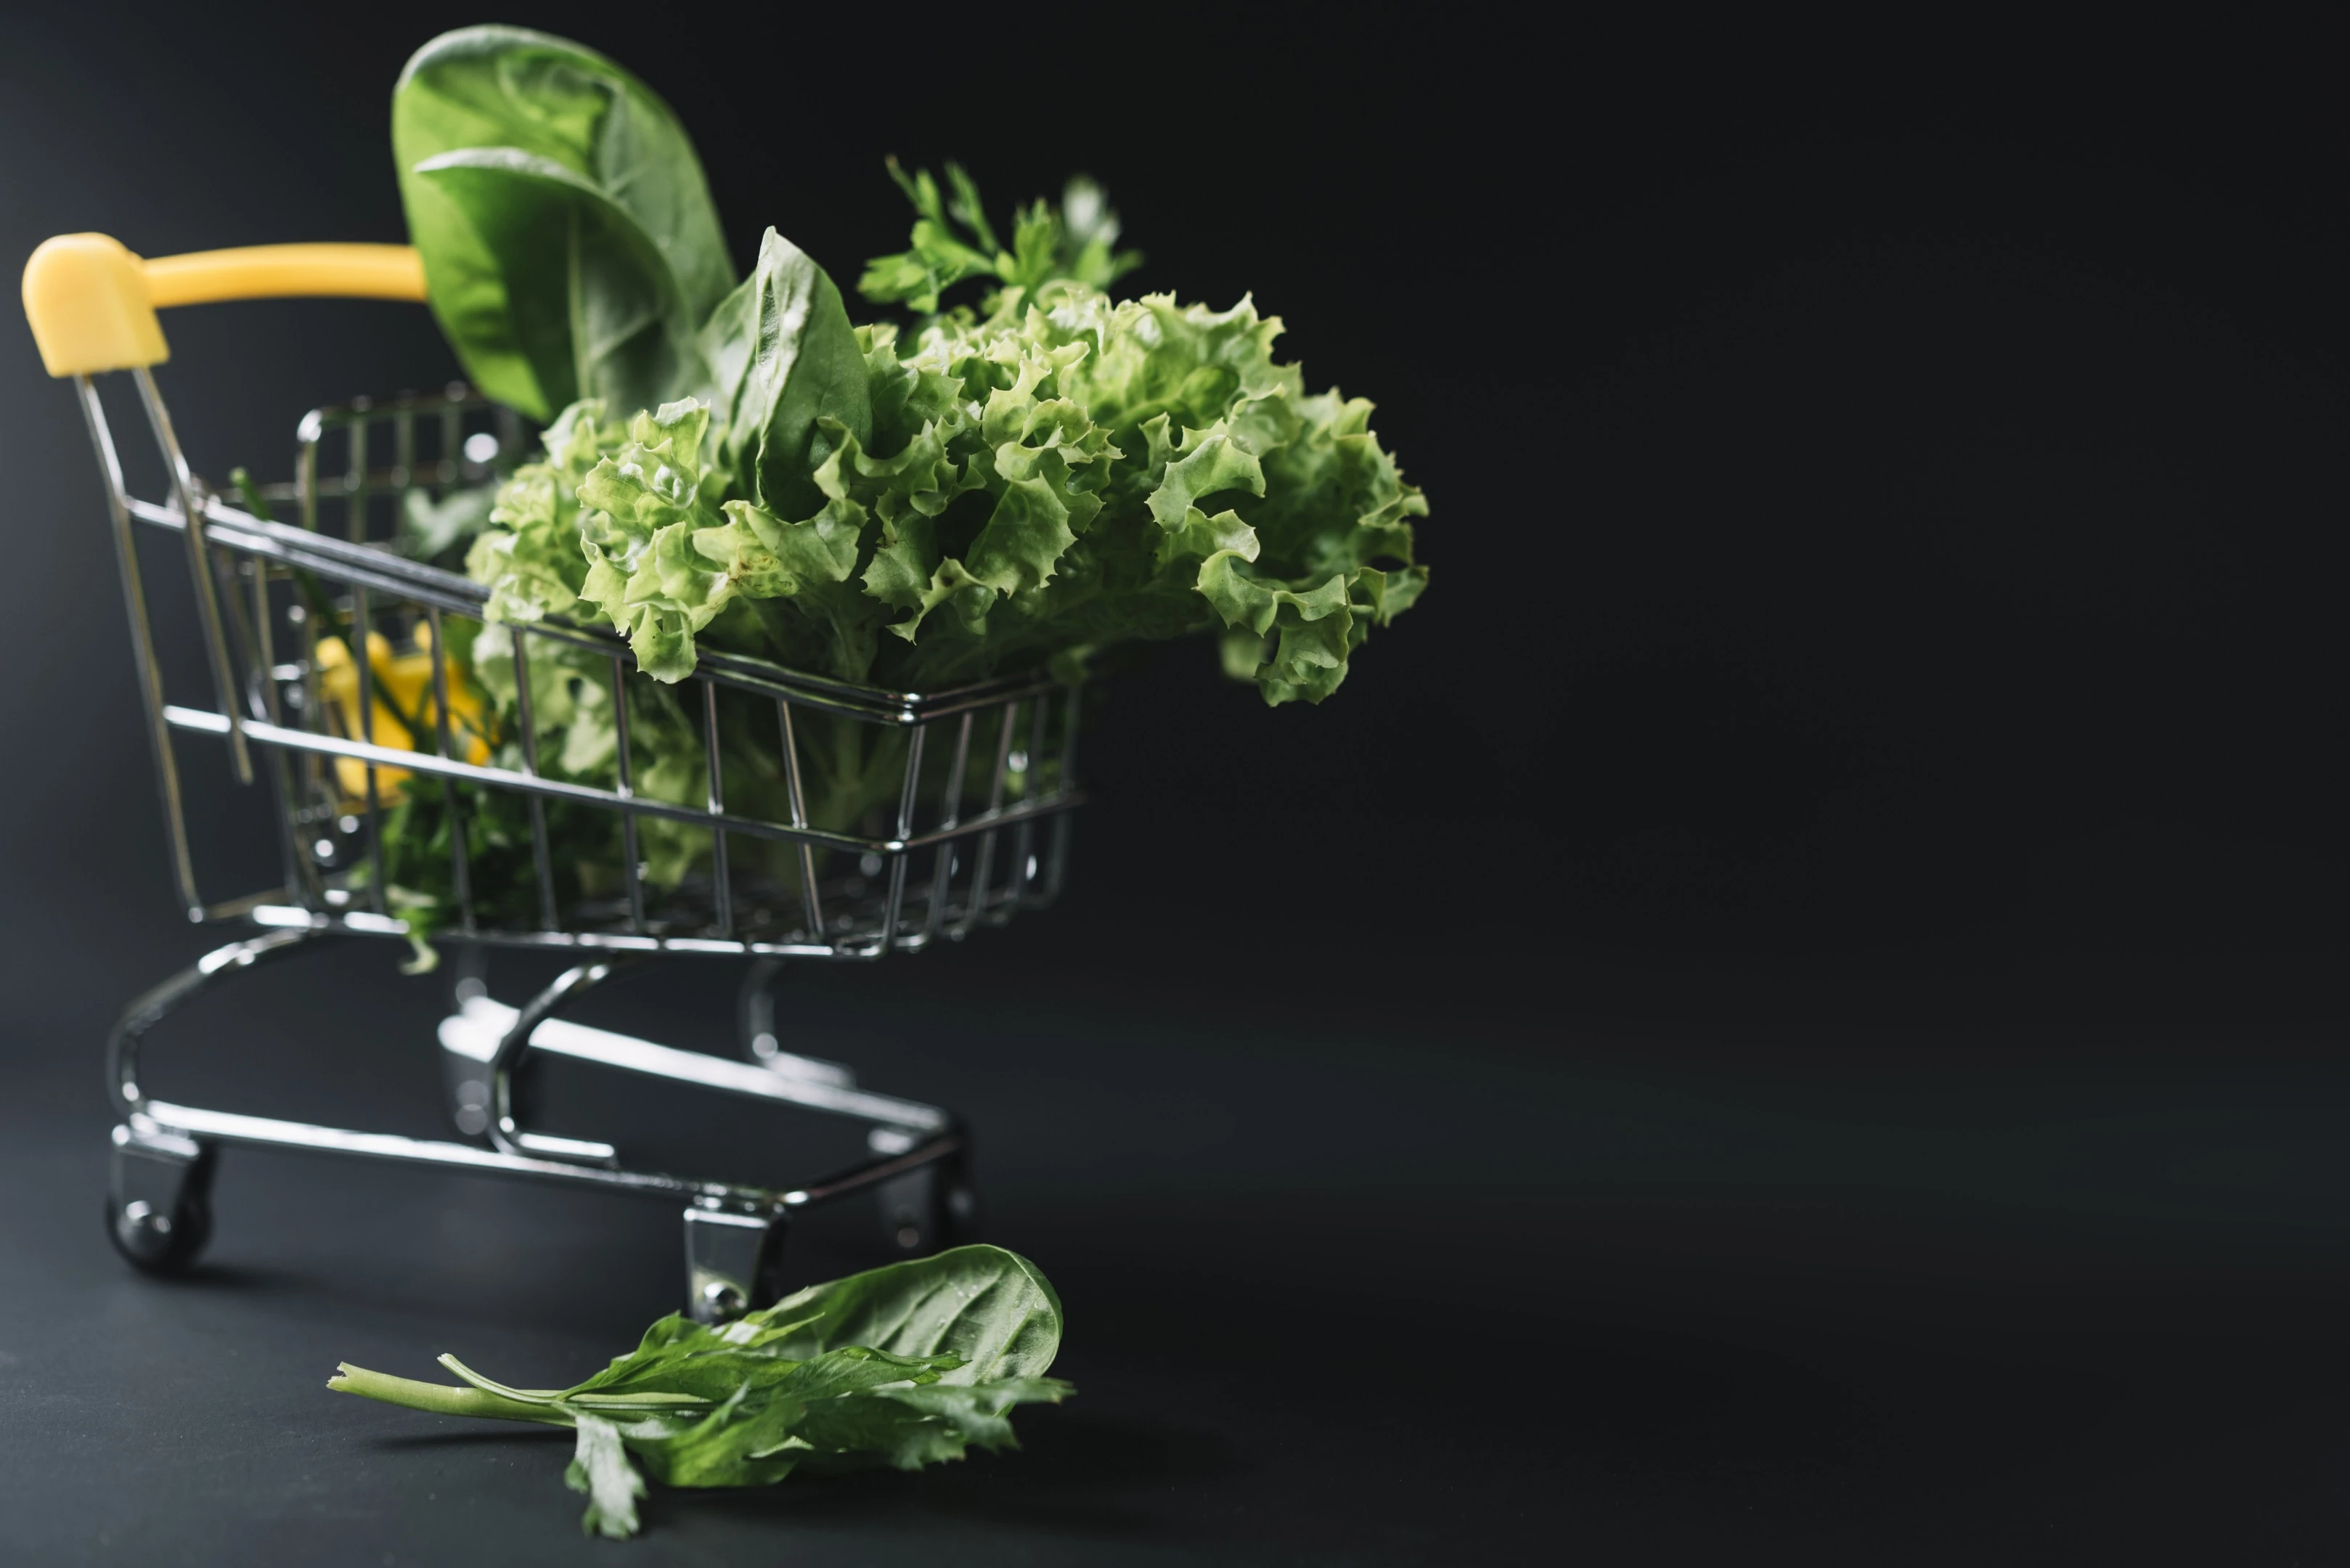 Fresh leafy green vegetables in small shopping cart on dark background